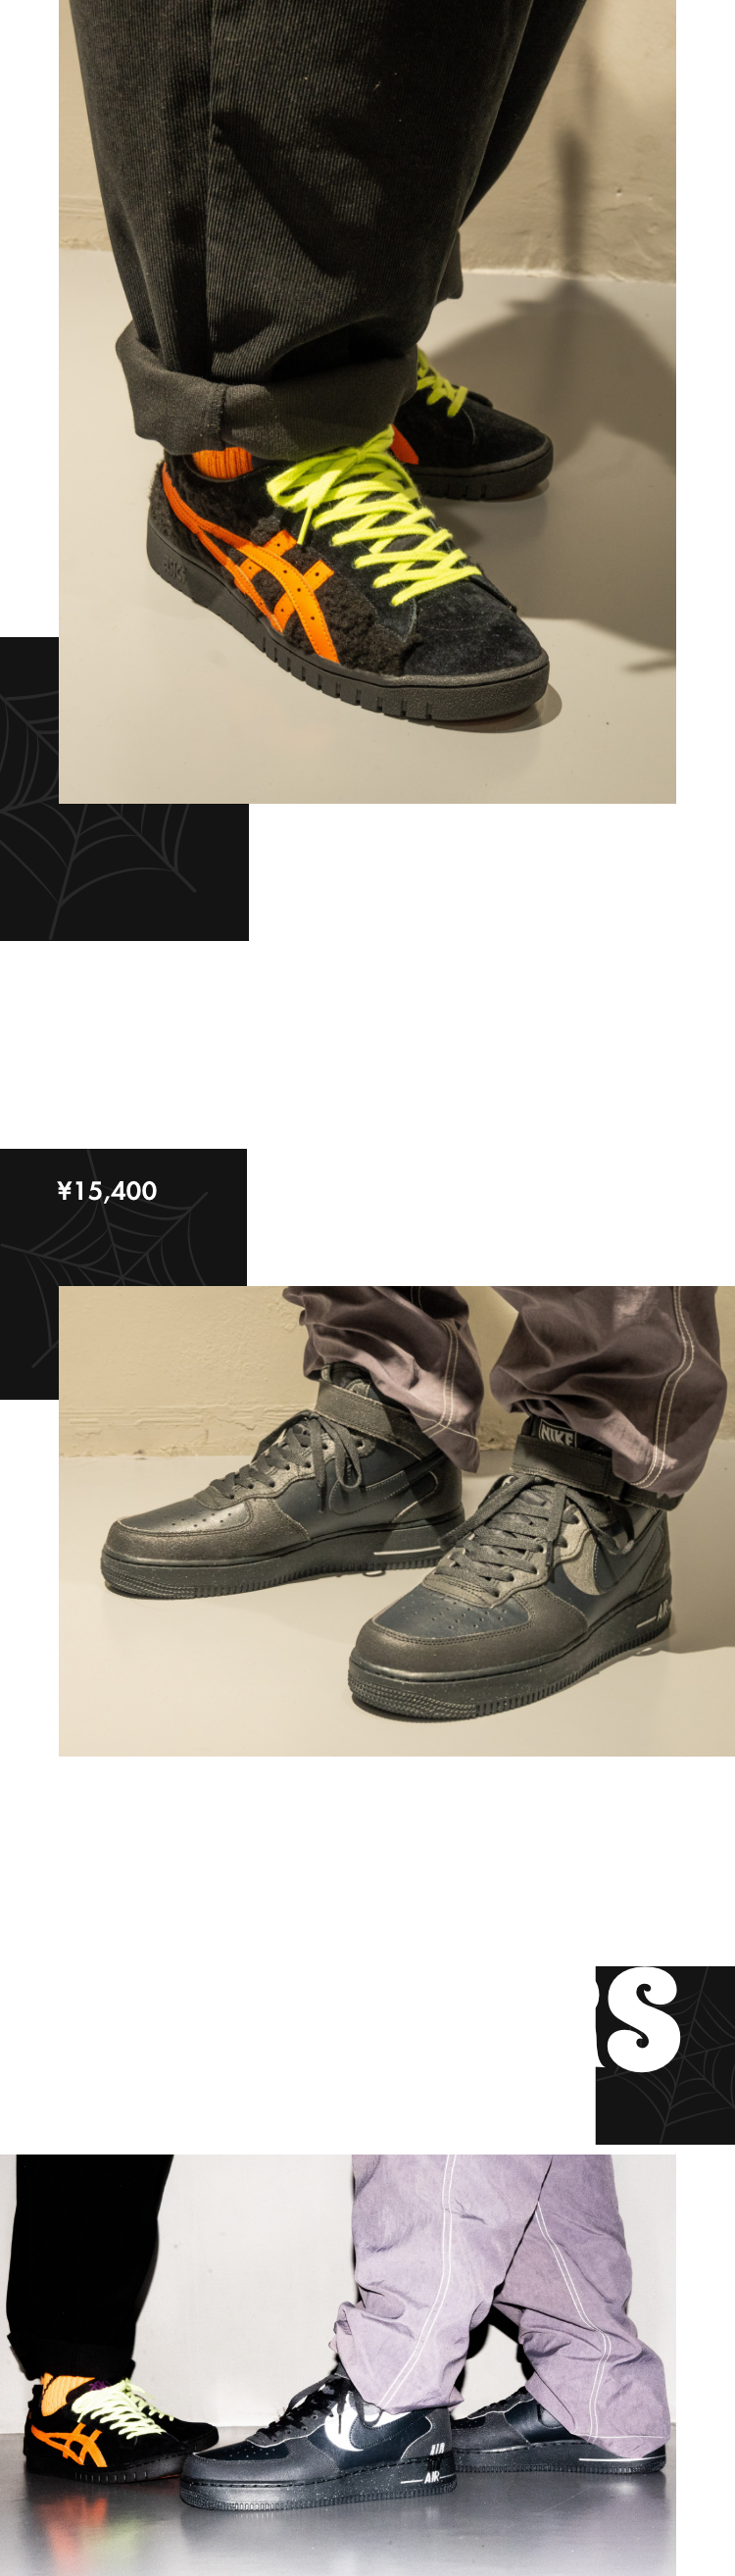 HALLOWEEN SNEAKERS COLLECTION